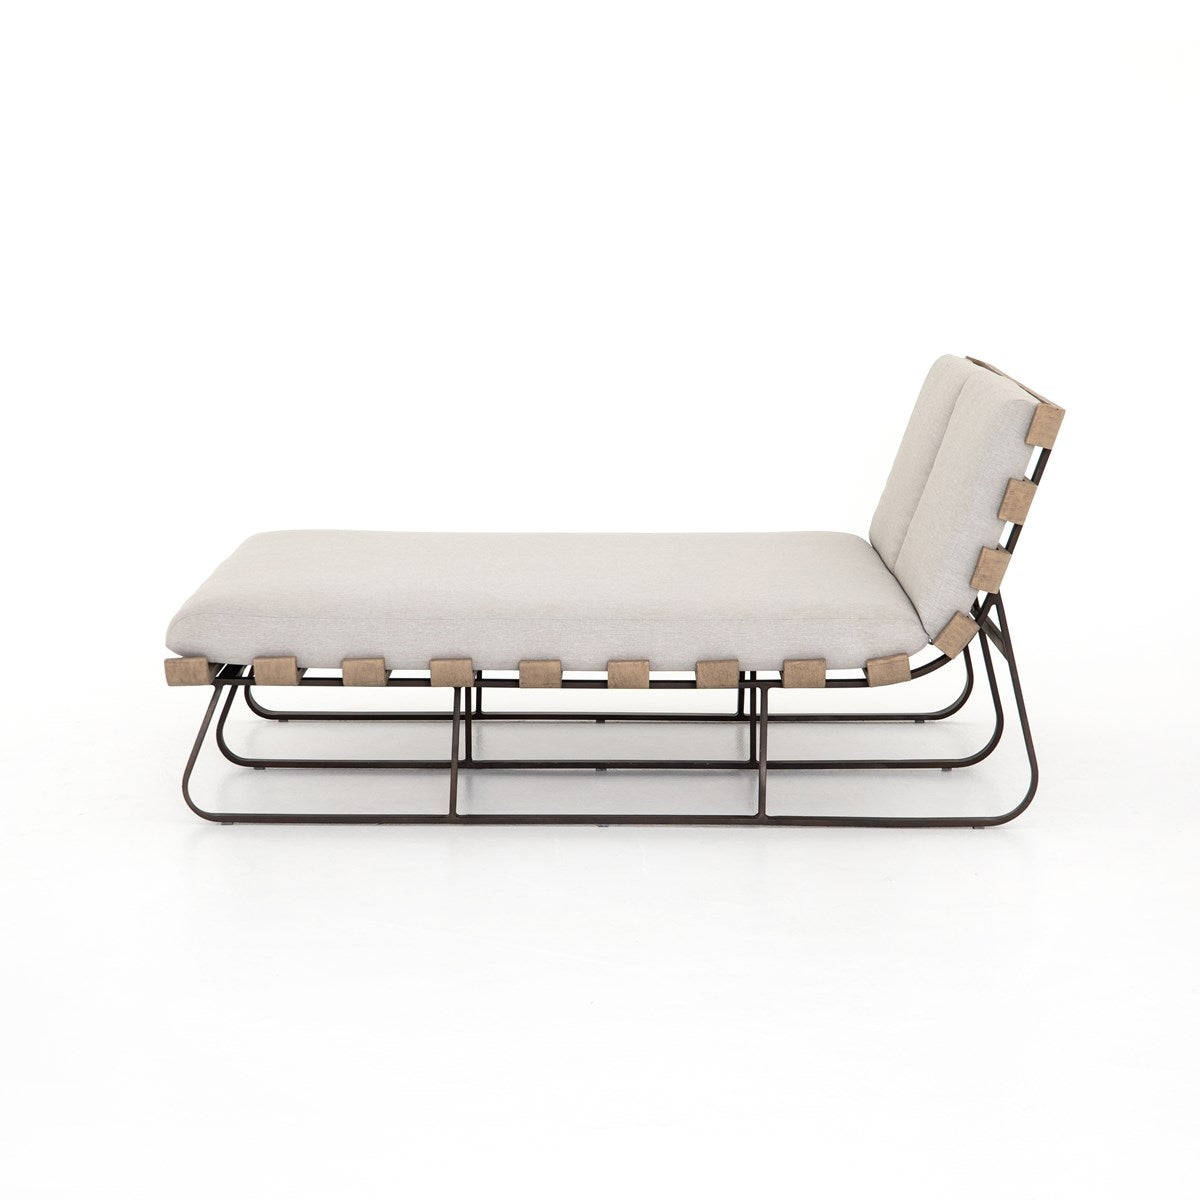 Dimitri Outdoor Double Daybed Double Daybed Four Hands     Four Hands, Burke Decor, Mid Century Modern Furniture, Old Bones Furniture Company, Old Bones Co, Modern Mid Century, Designer Furniture, https://www.oldbonesco.com/